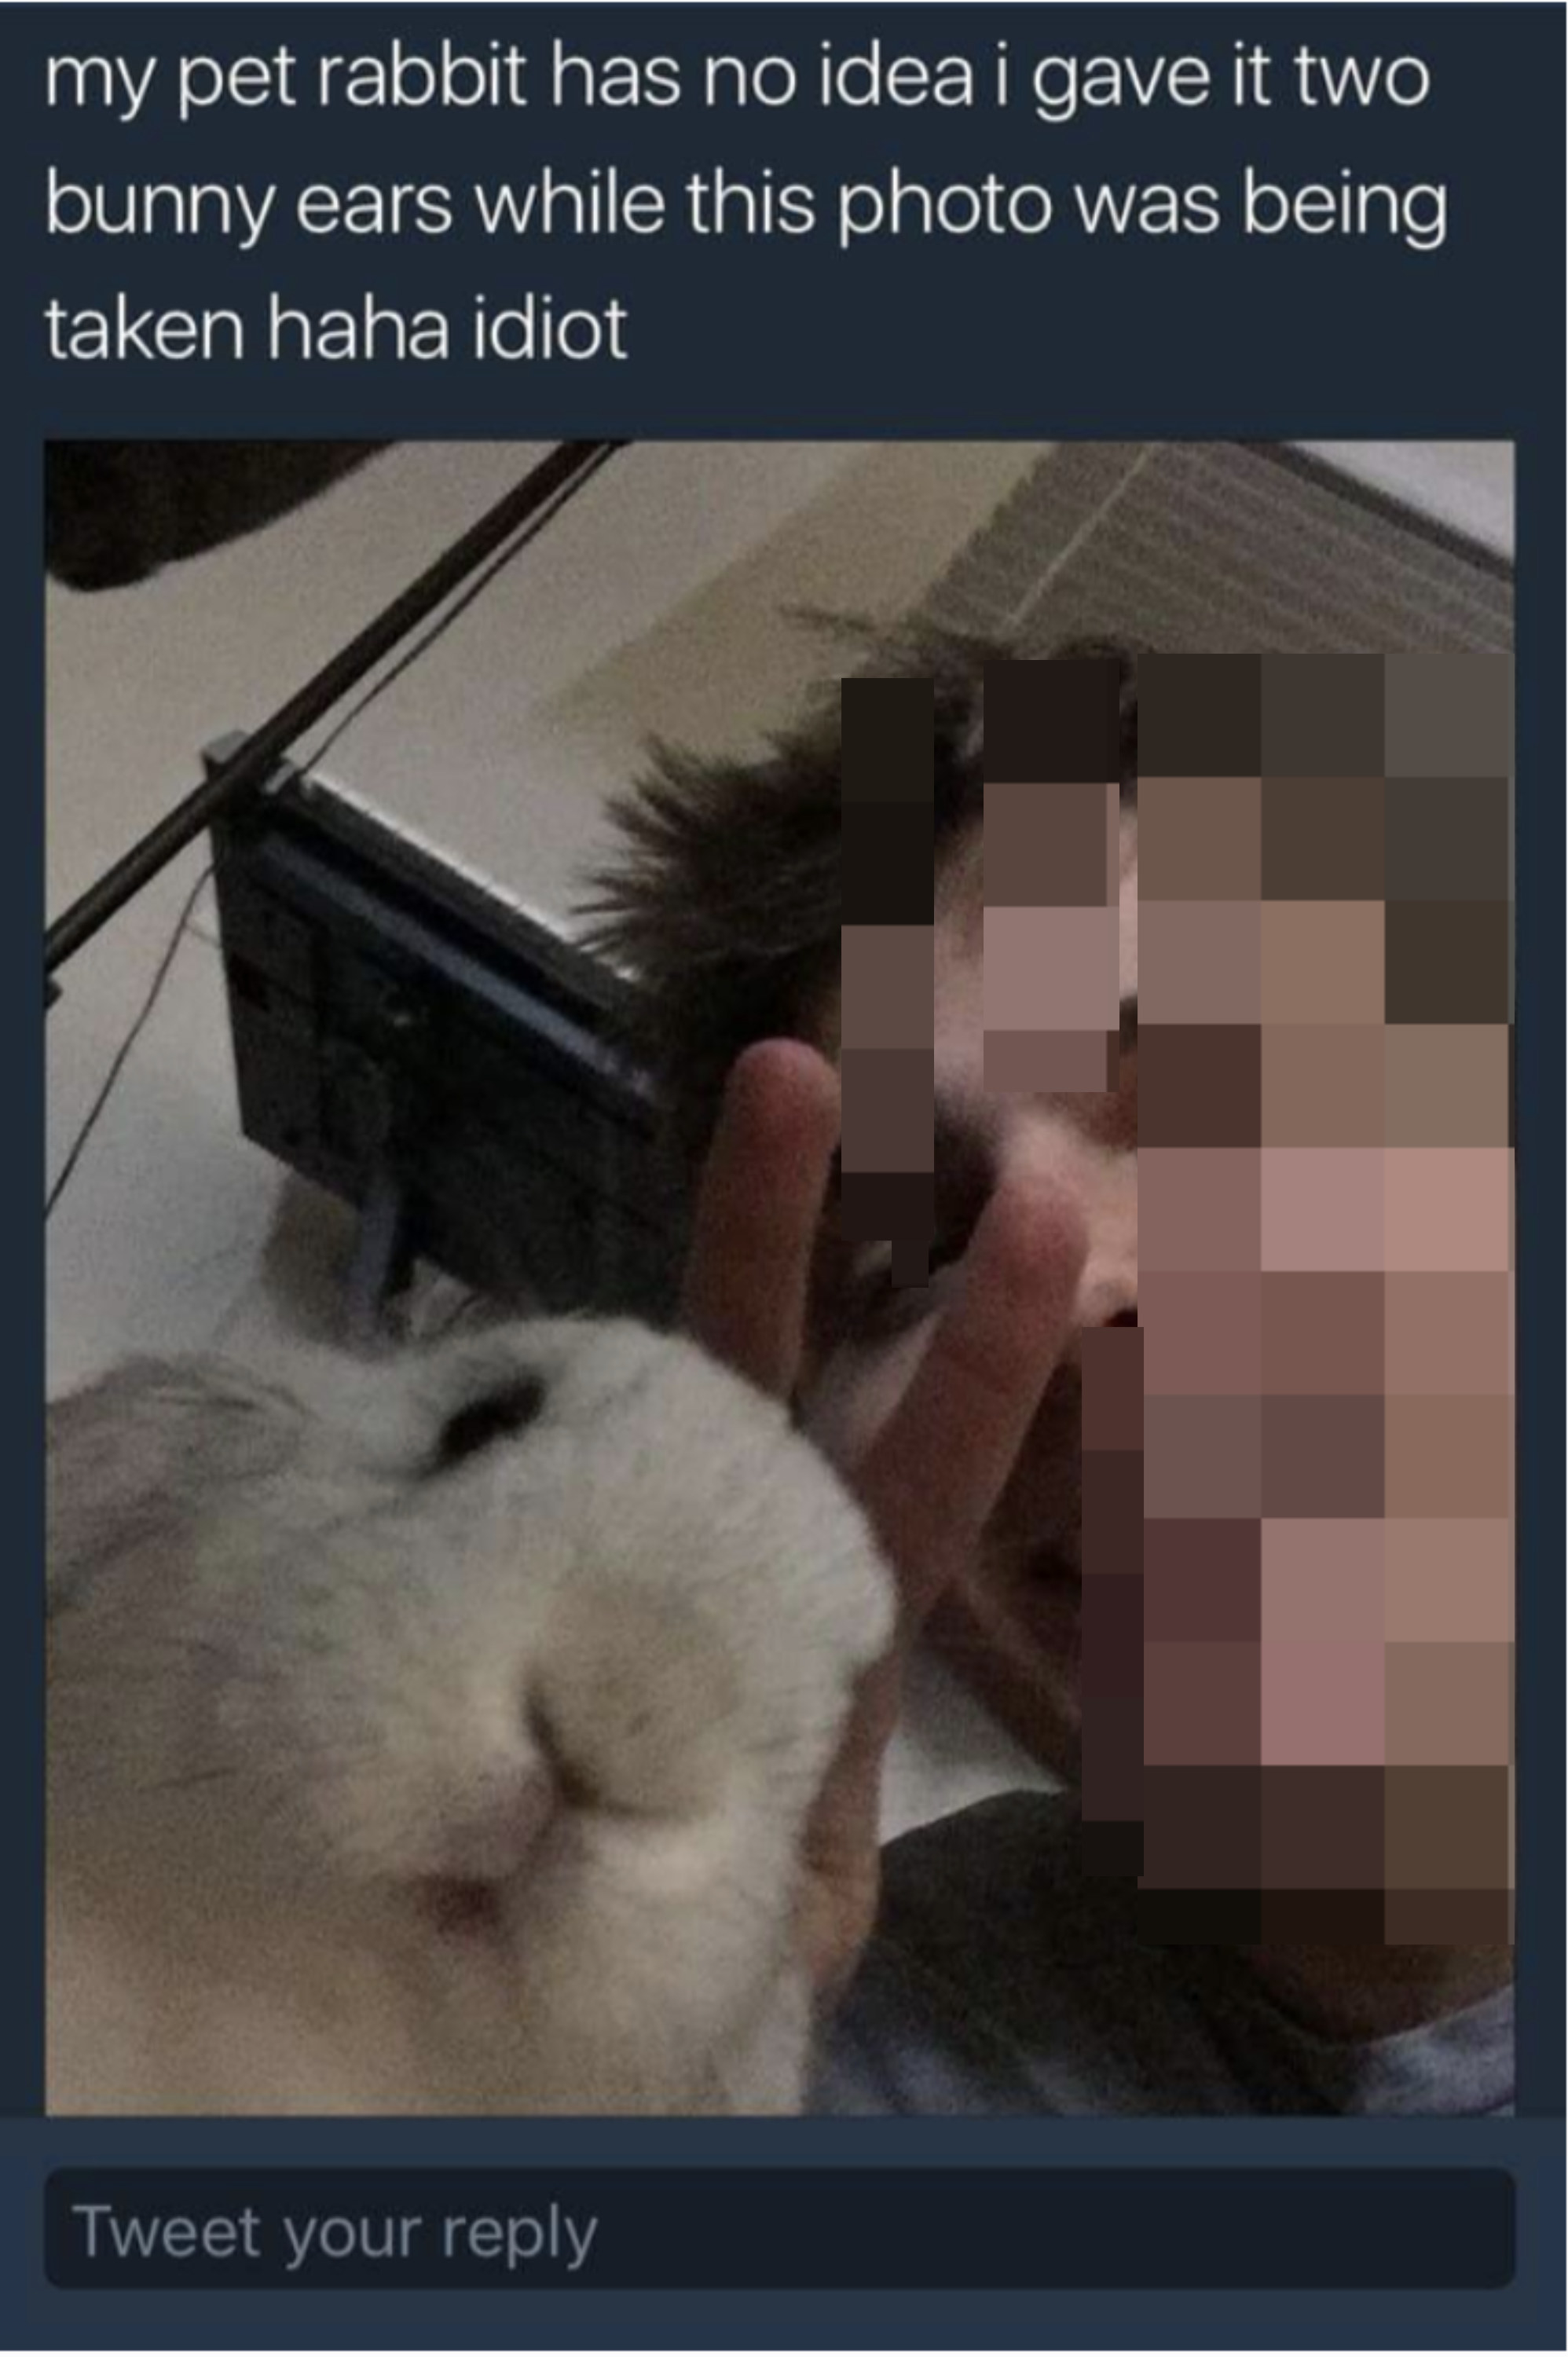 selfie of a guy putting up &quot;bunny ears&quot; peace sign behind his pet bunny